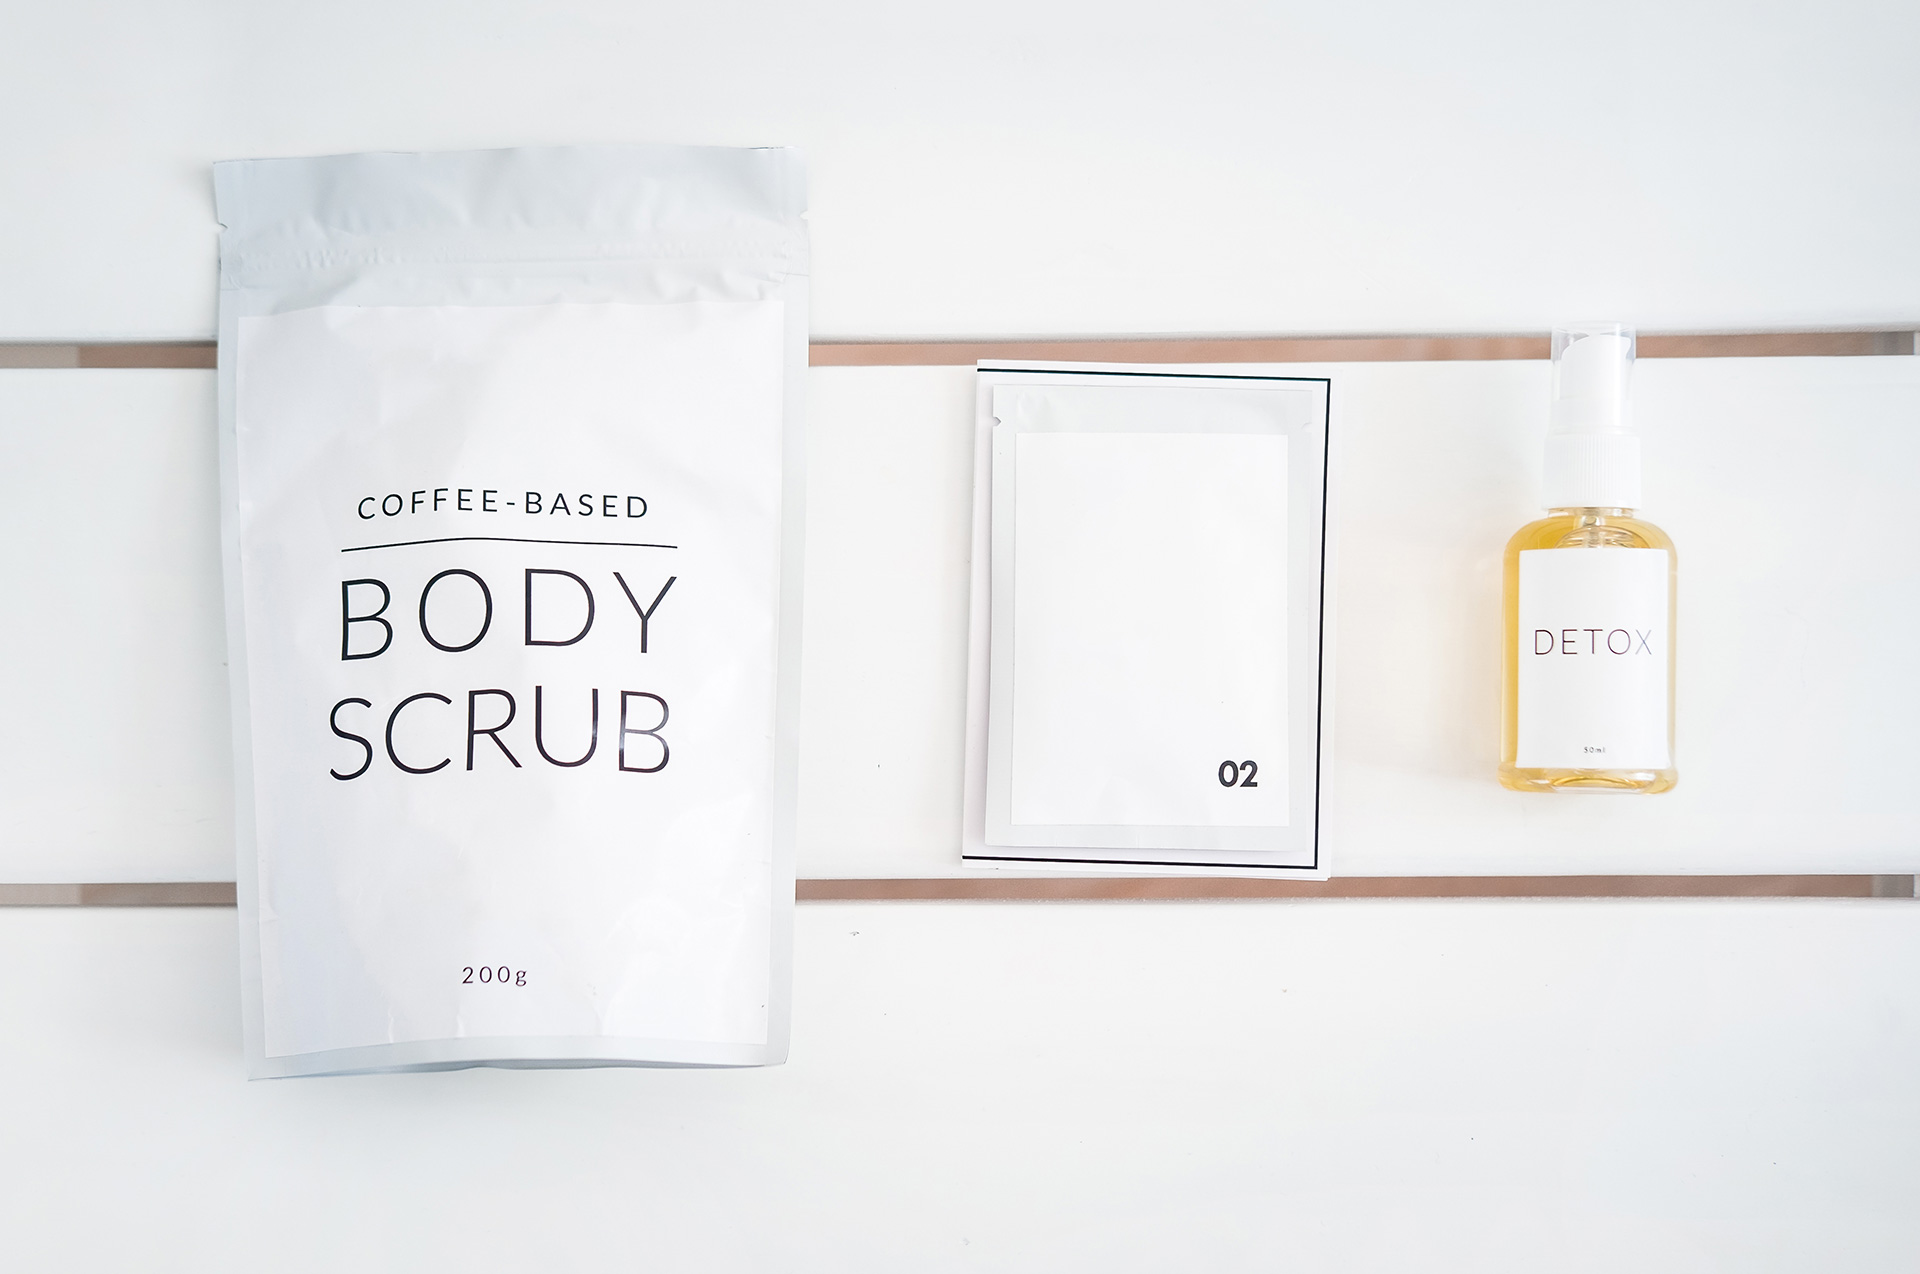 Less is More with Minimalist Packaging | GEP